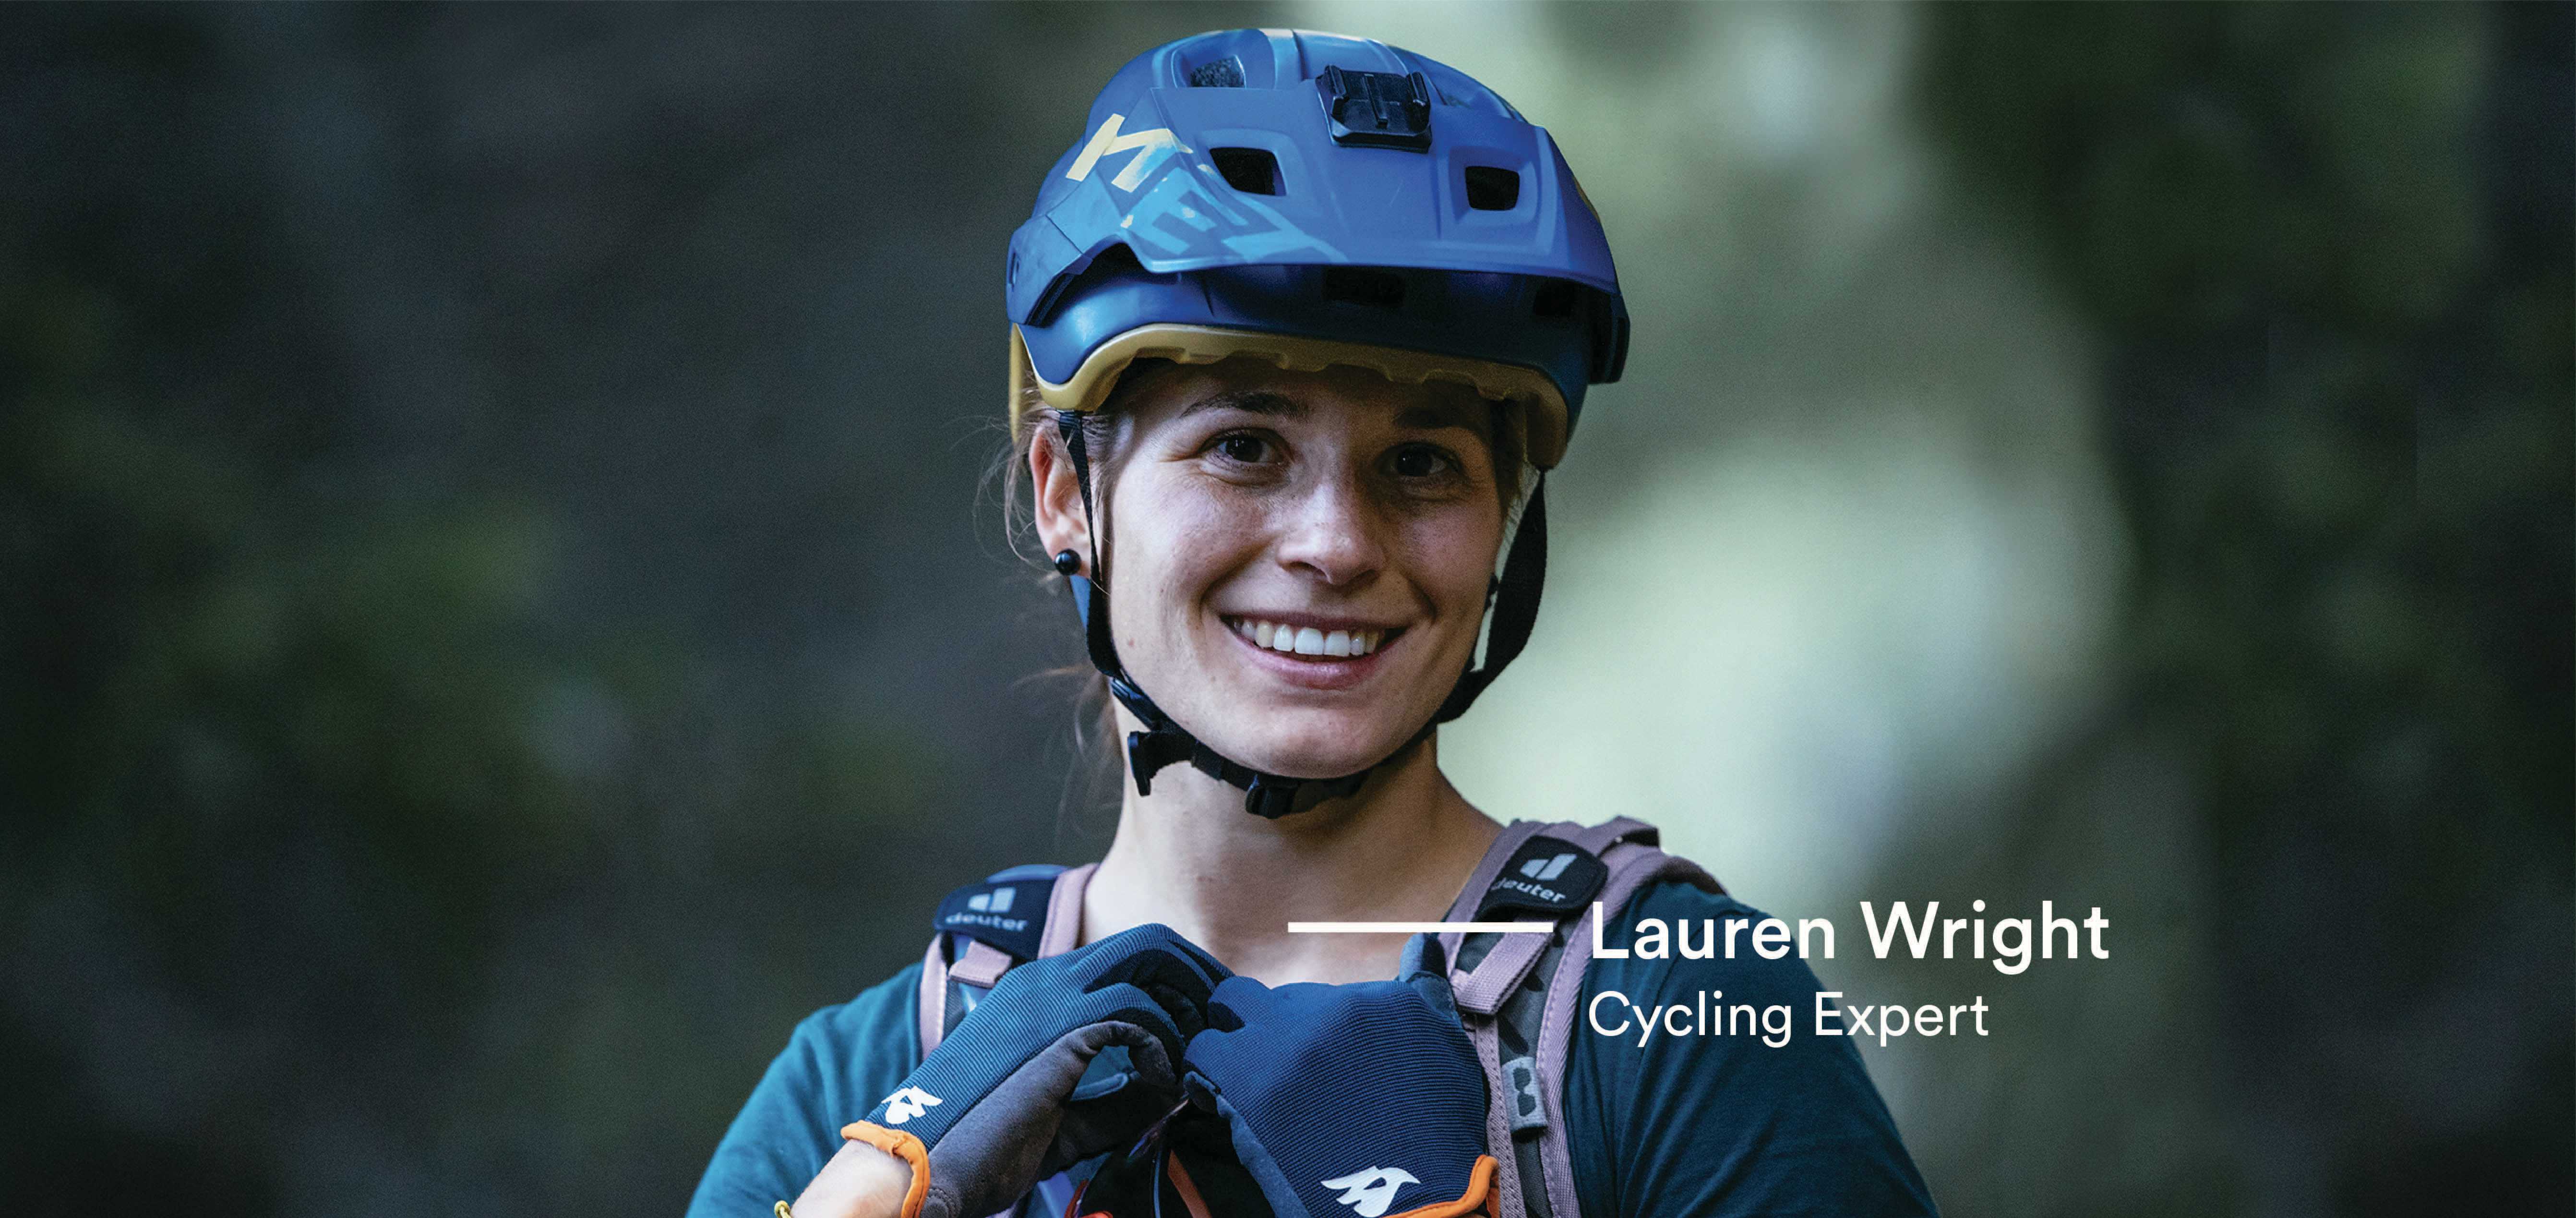 Cycling Expert Lauren Wright smiles at the camera while wearing a blue helmet. 